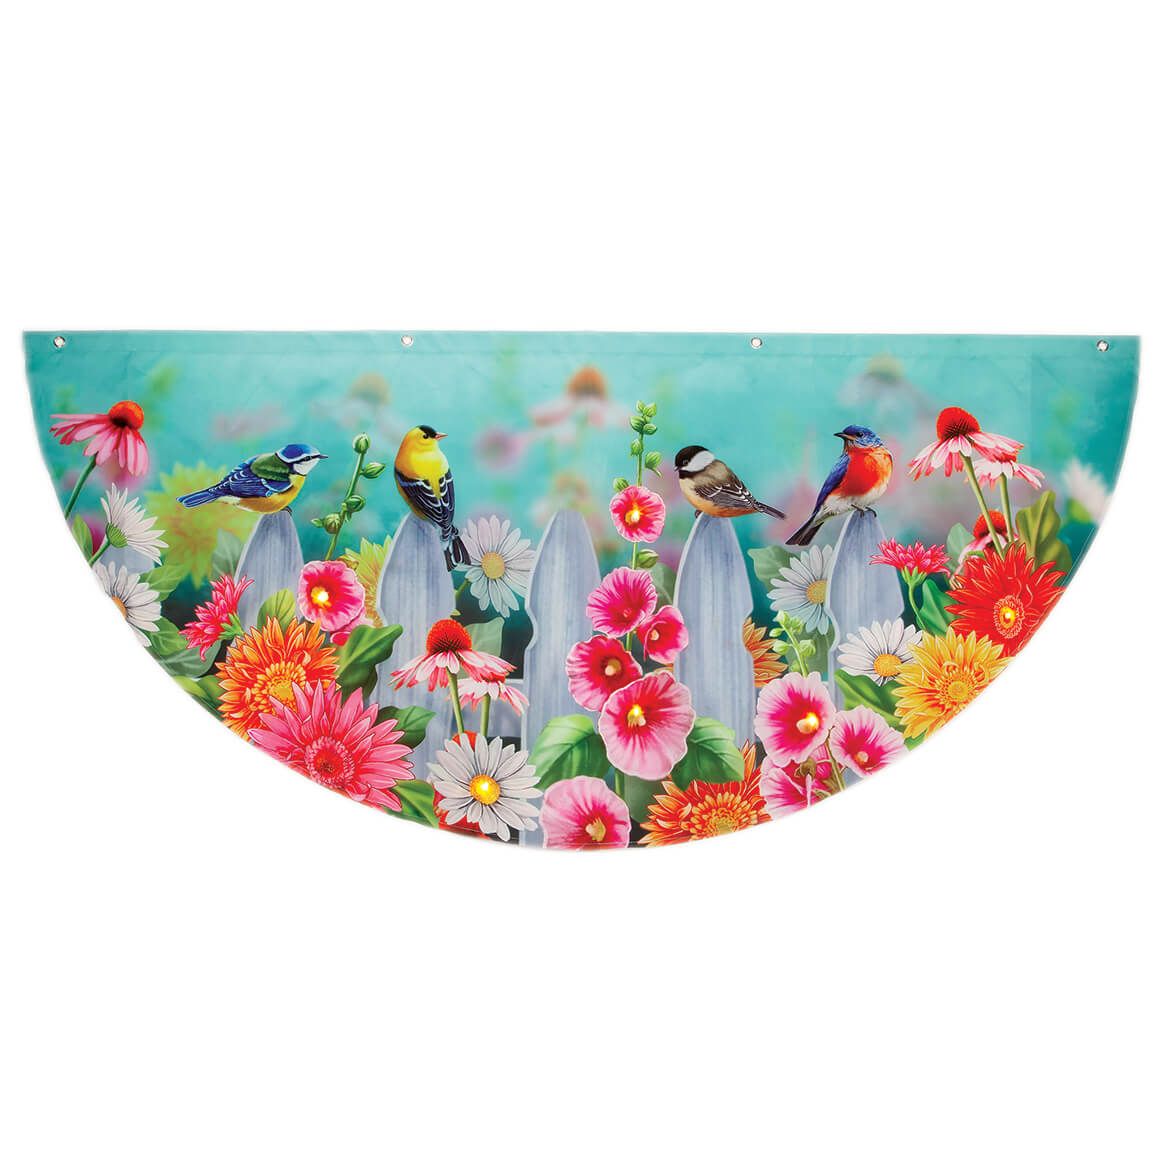 Lighted Spring Birds Bunting by Fox River Creations™ + '-' + 375958